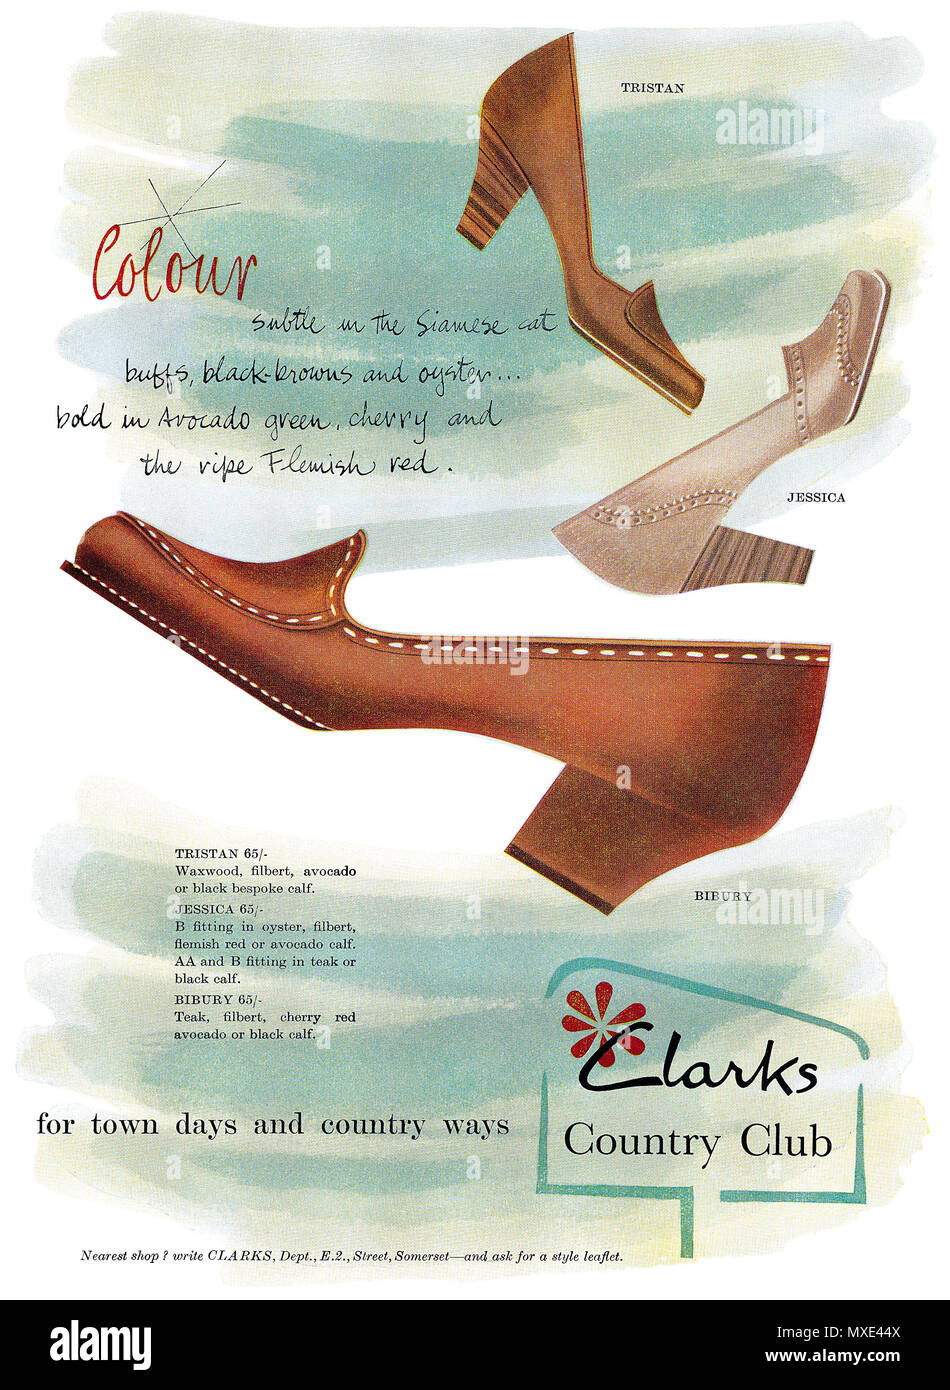 old clarks shoes styles